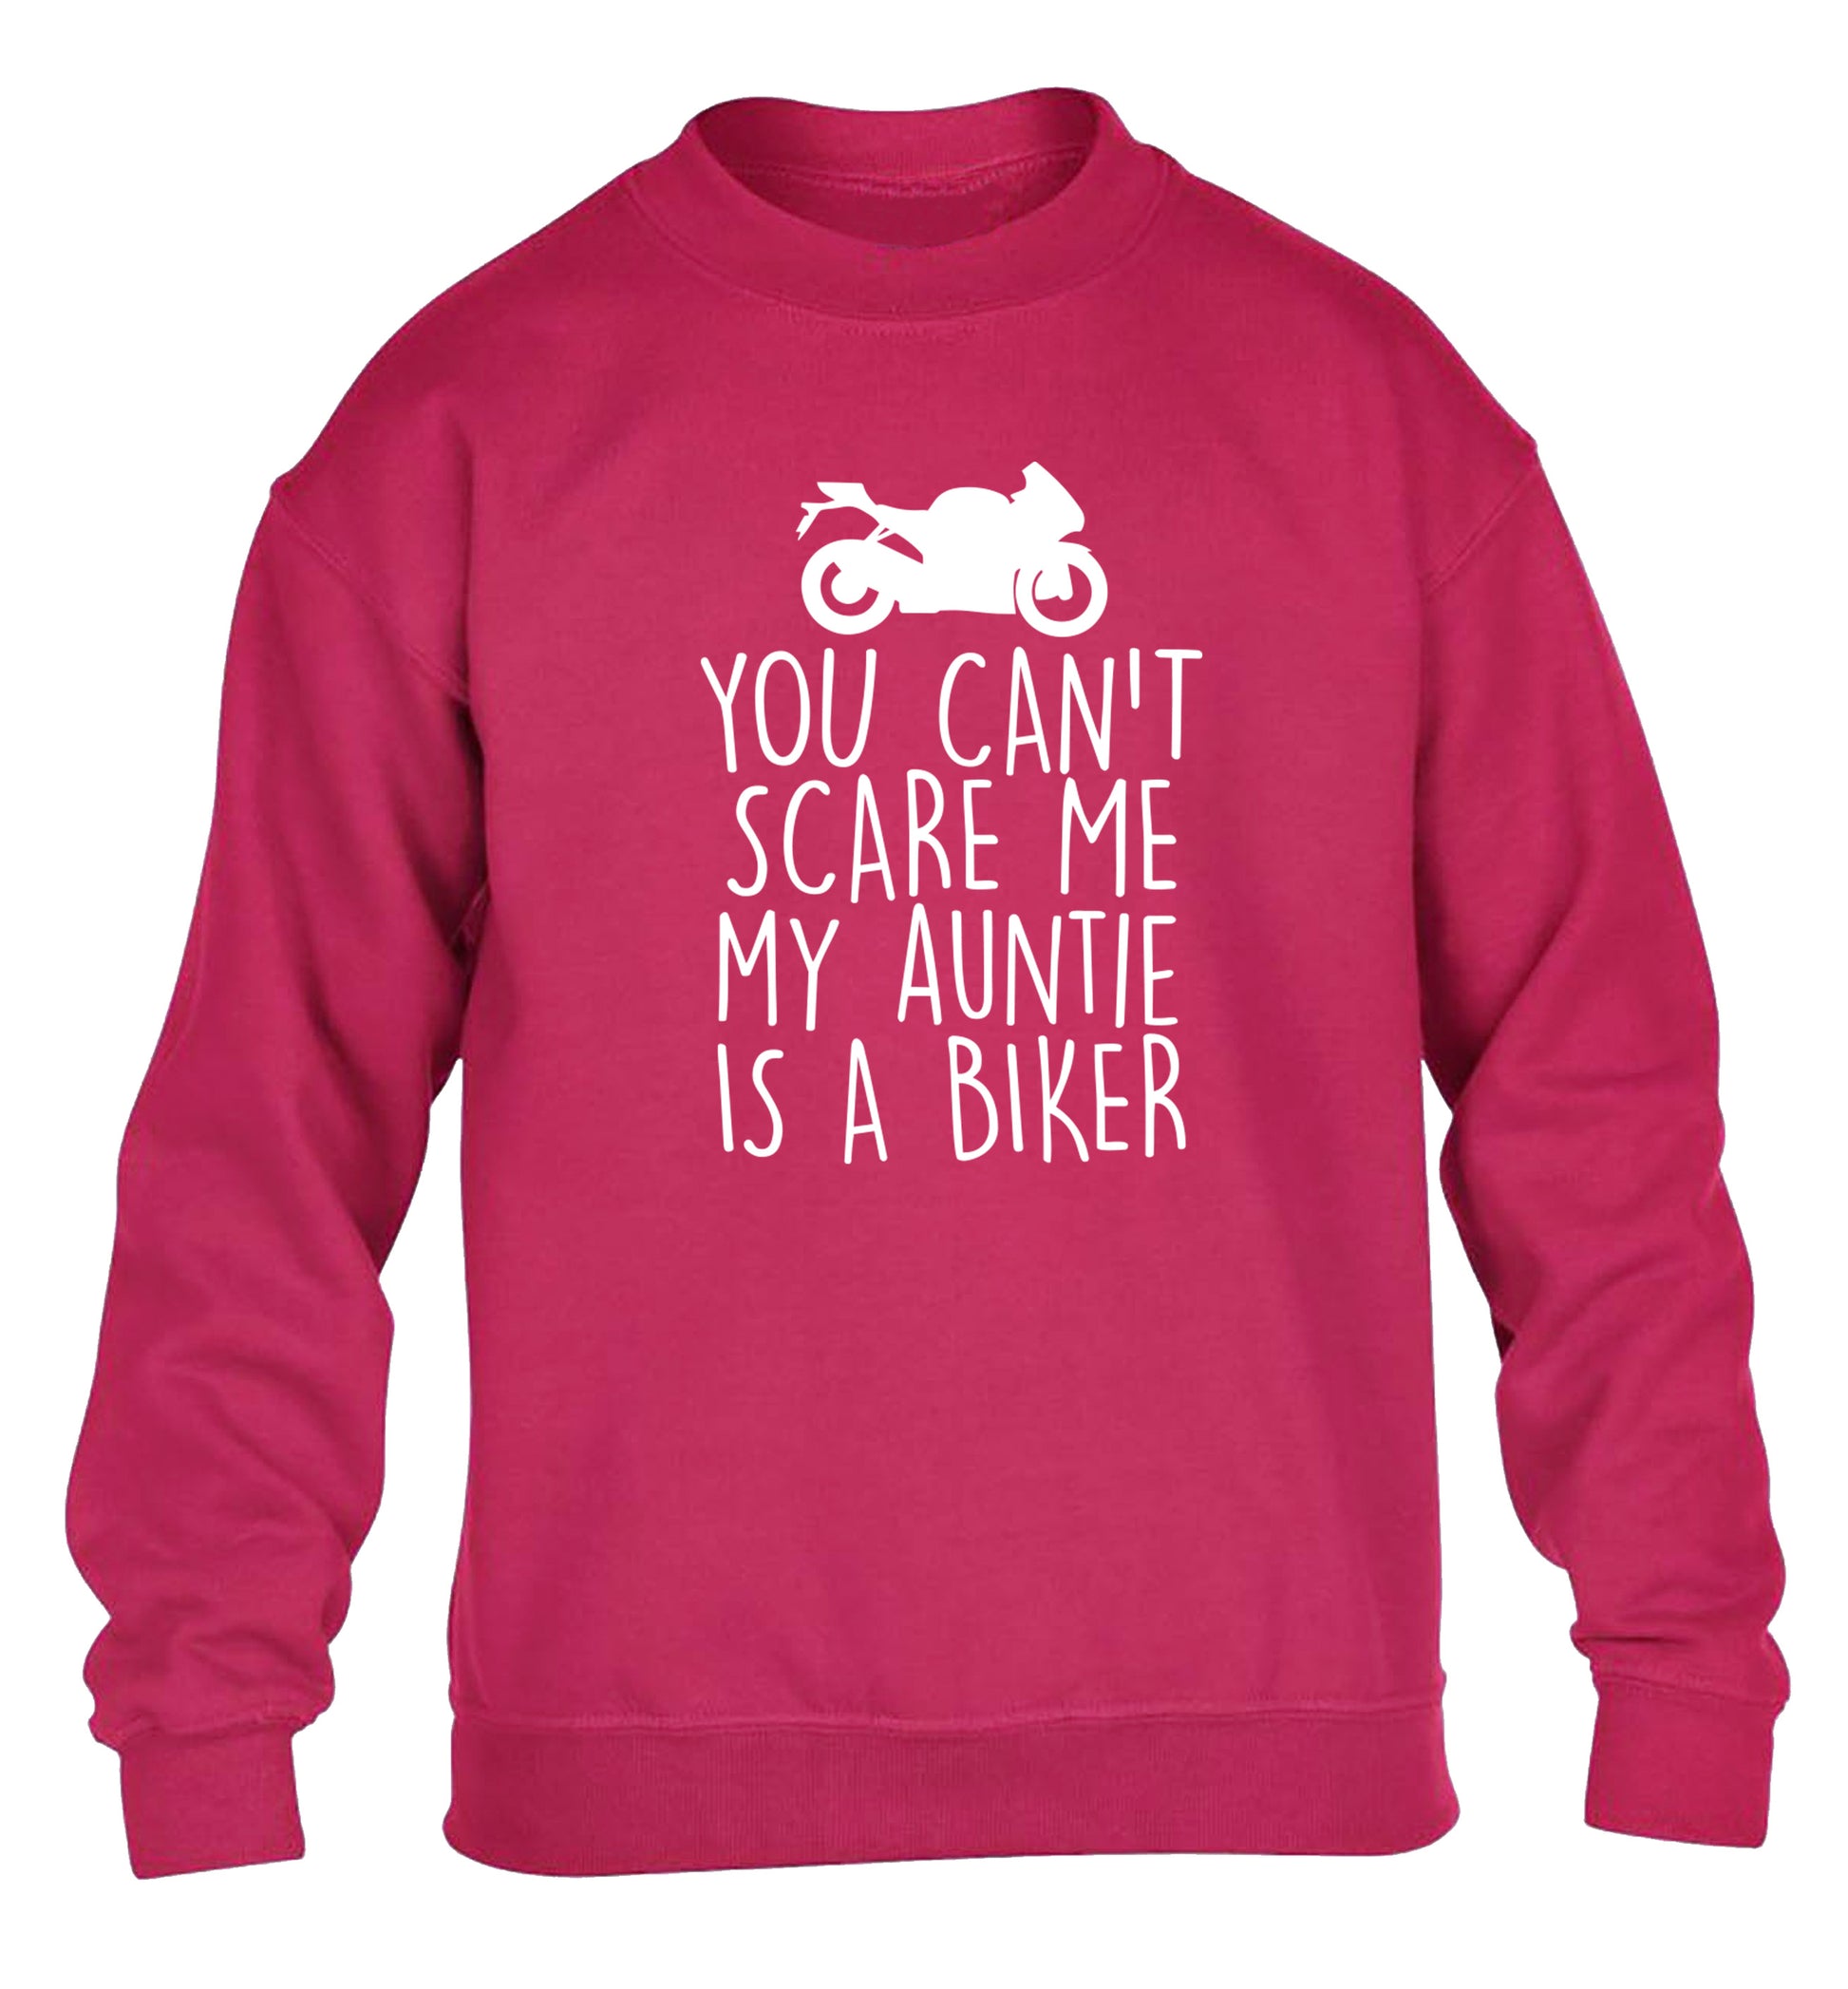 You can't scare me my auntie is a biker children's pink sweater 12-13 Years